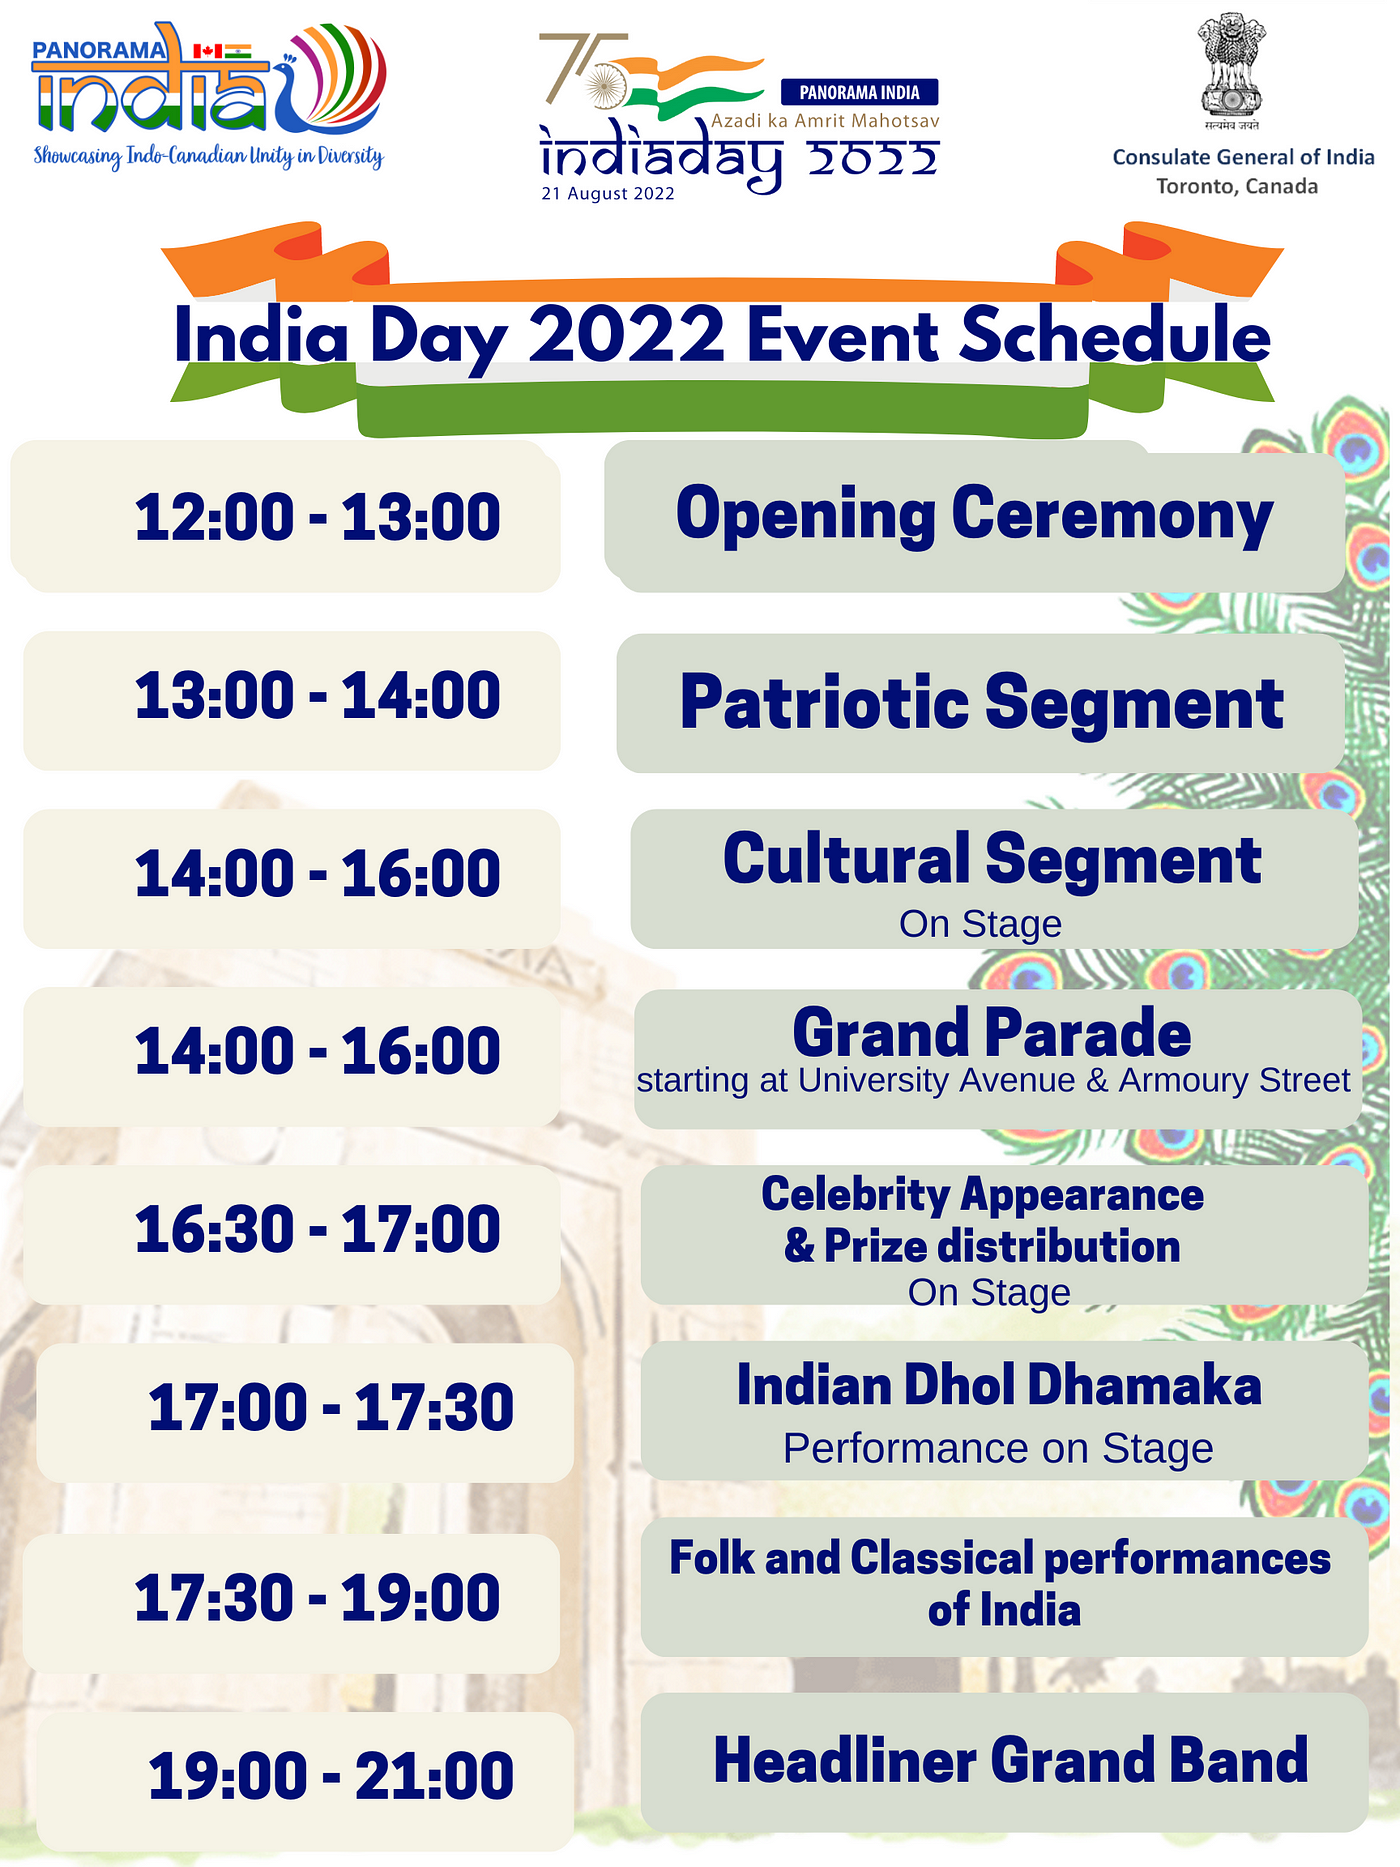 Azadi Ka Amrit Mahotsav — The 75th Indian Independence Day. With the support of the Consulate General of India, Toronto, and its Sponsors and Media Partners, Panorama India is ready to celebrate Azadi Ka Amrit Mahotsav — India’s 75th Anniversary of Indian Independence Day (actually on Aug 15) on August 21, 2022, at Nathan Philip Square (NPS). Media partners are MUKTA Advertising and Nouveau iDEA by Tushar Unadkat.